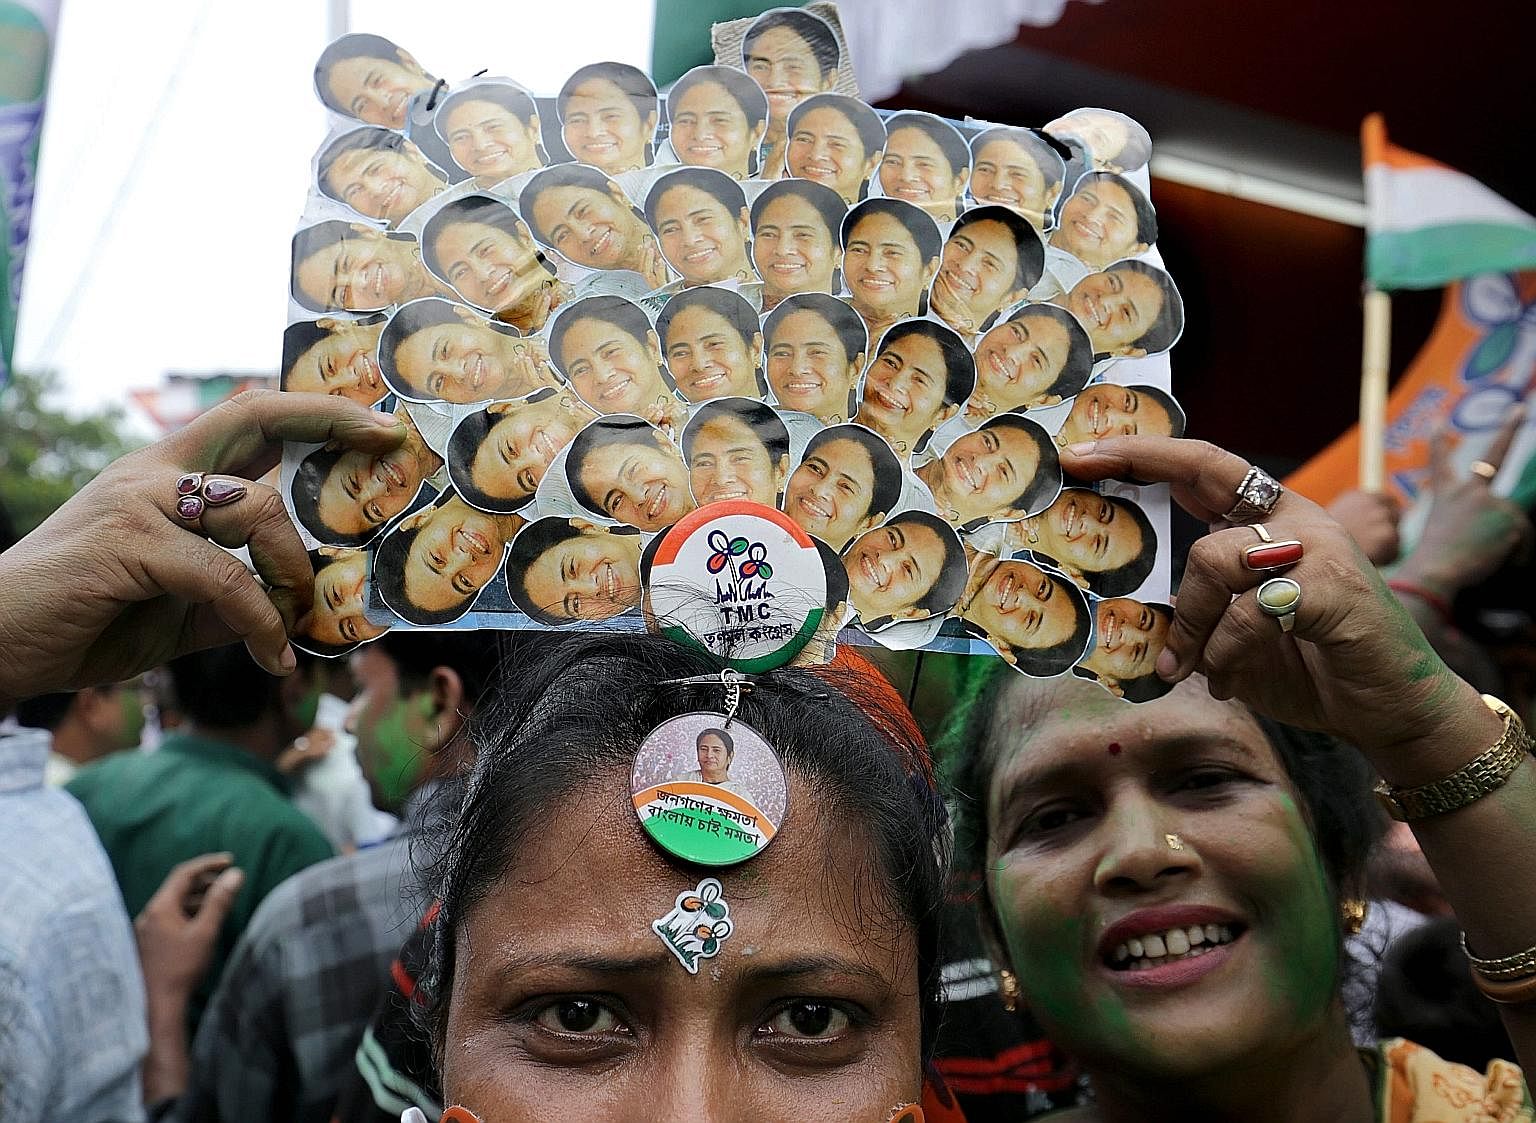 A Trinamool Congress party supporter wears a crown made out of Chief Minister Mamata Banerjee's photos during celebrations after she won an absolute majority in the West Bengal Assembly election in Kolkata.